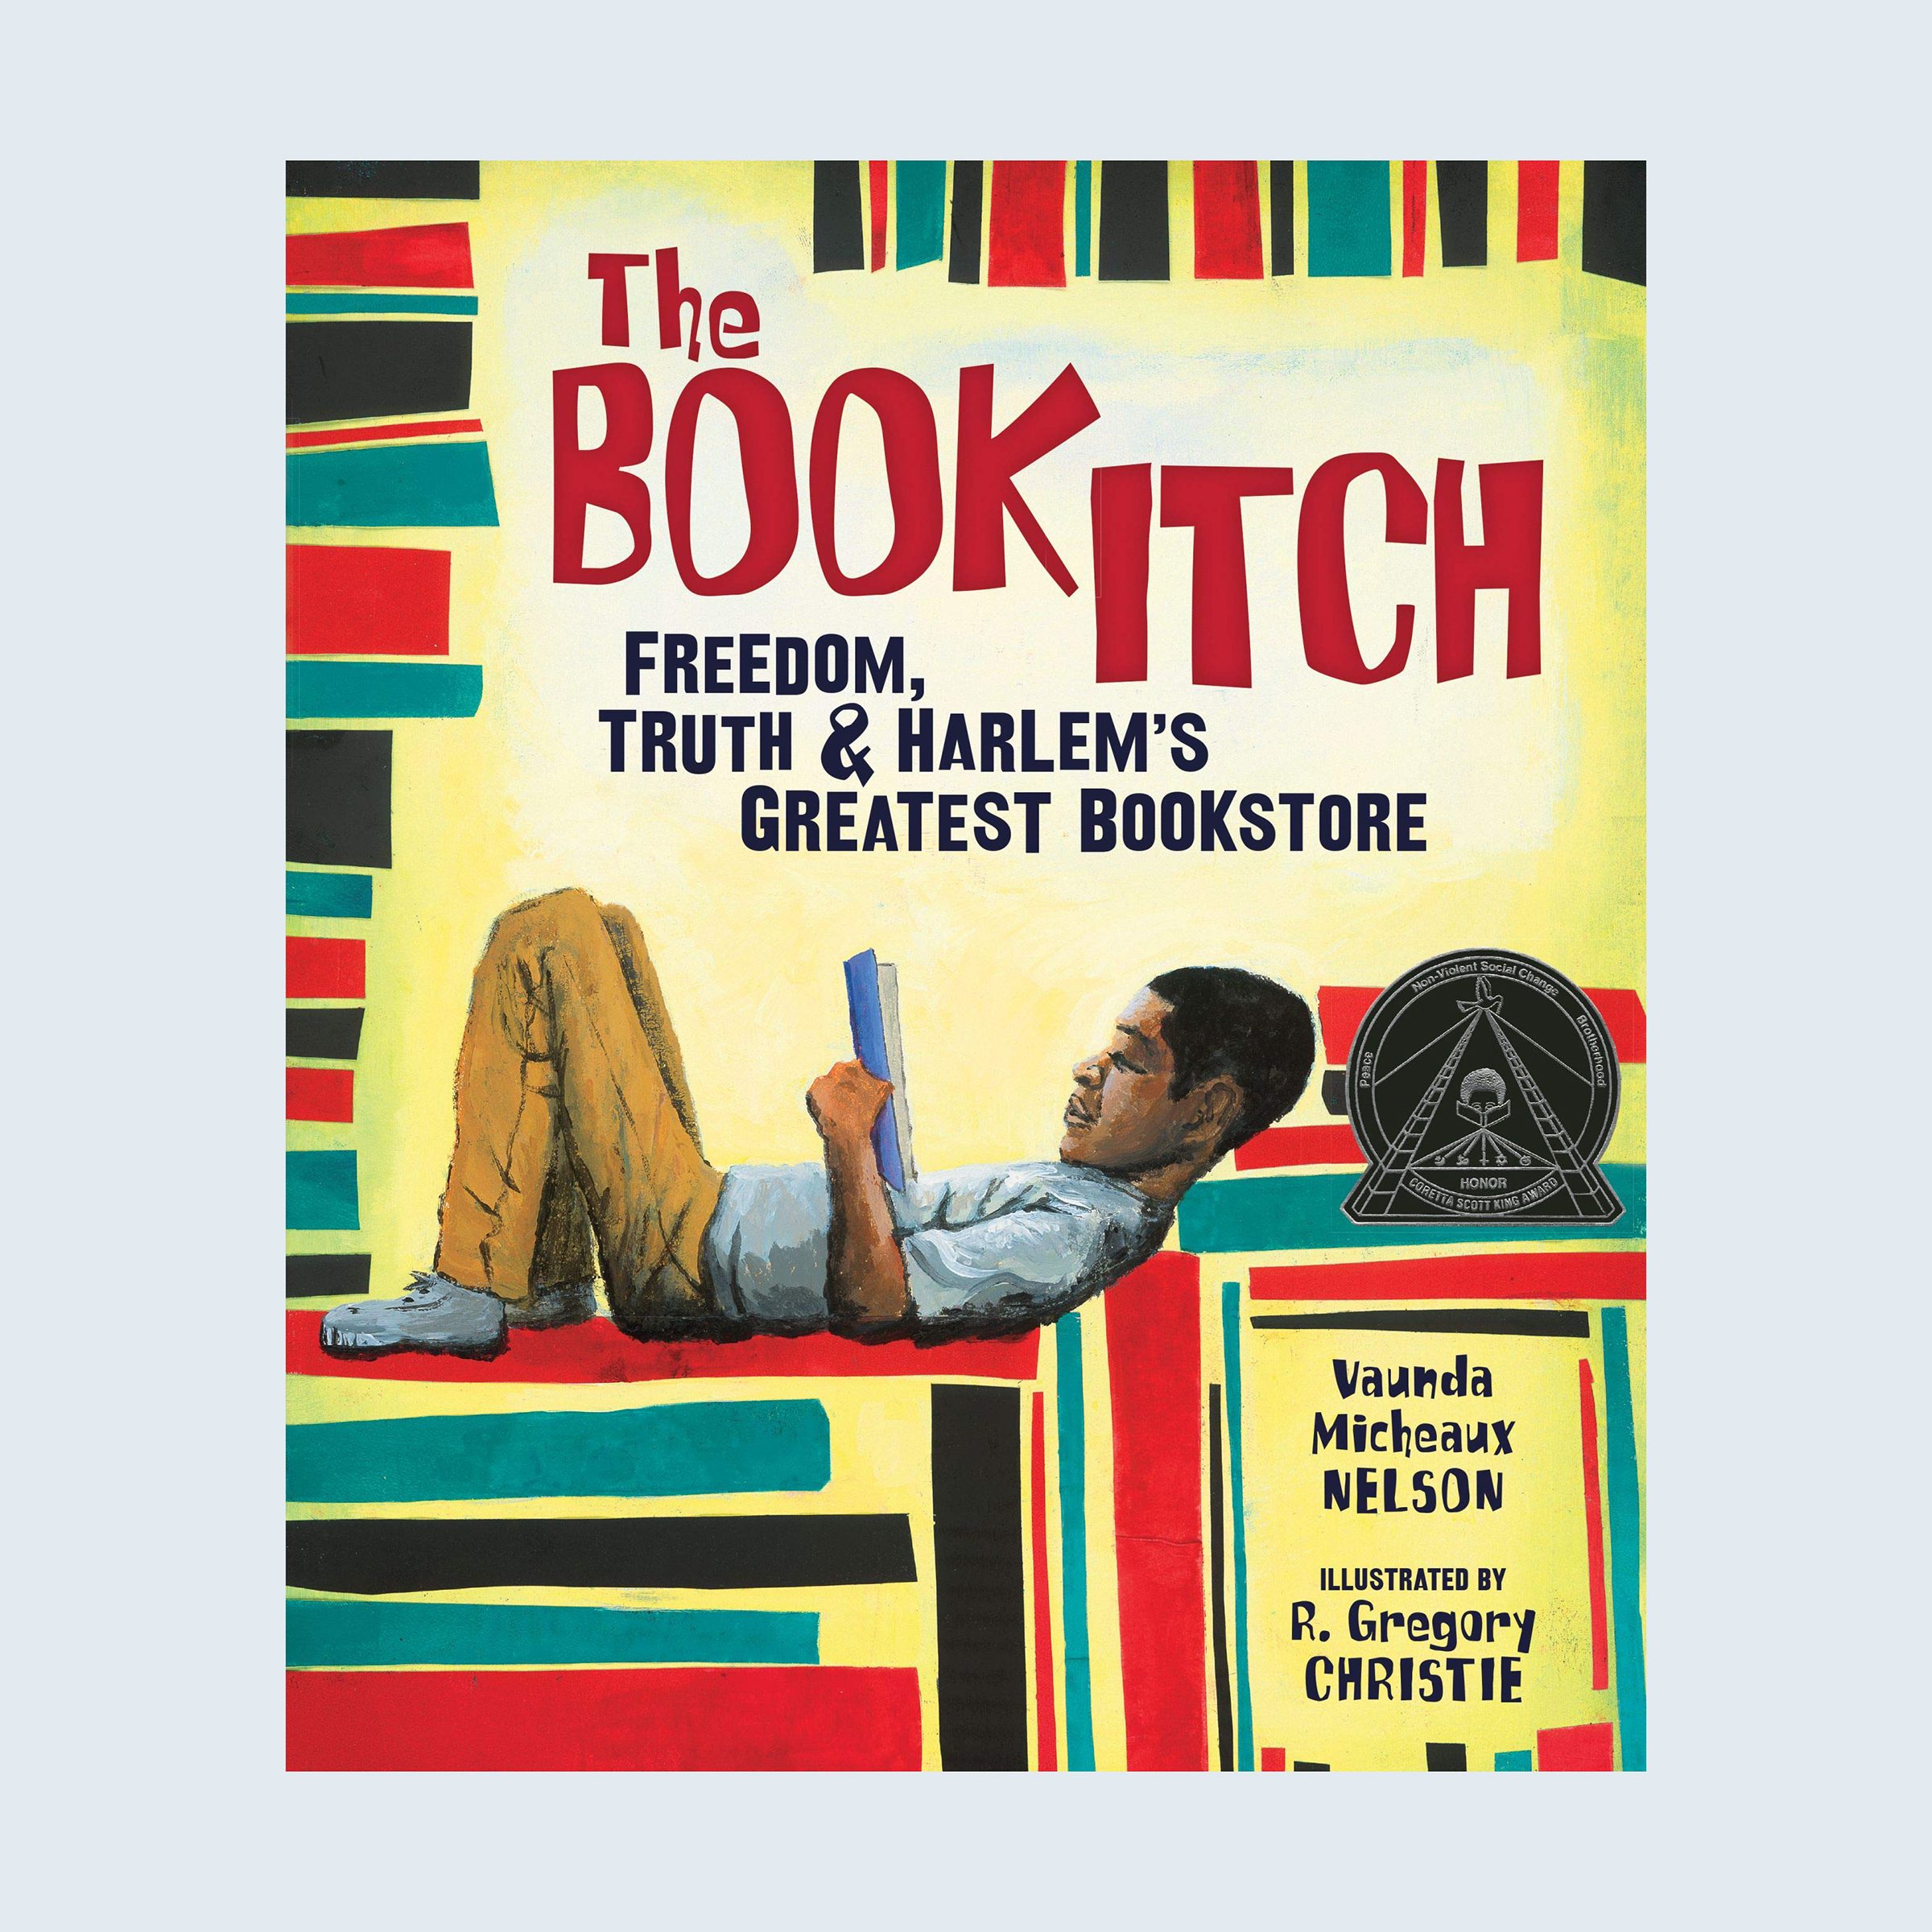 The Book Itch: Freedom, Truth, & Harlem's Greatest Bookstore by Vaunda Michaux Nelson